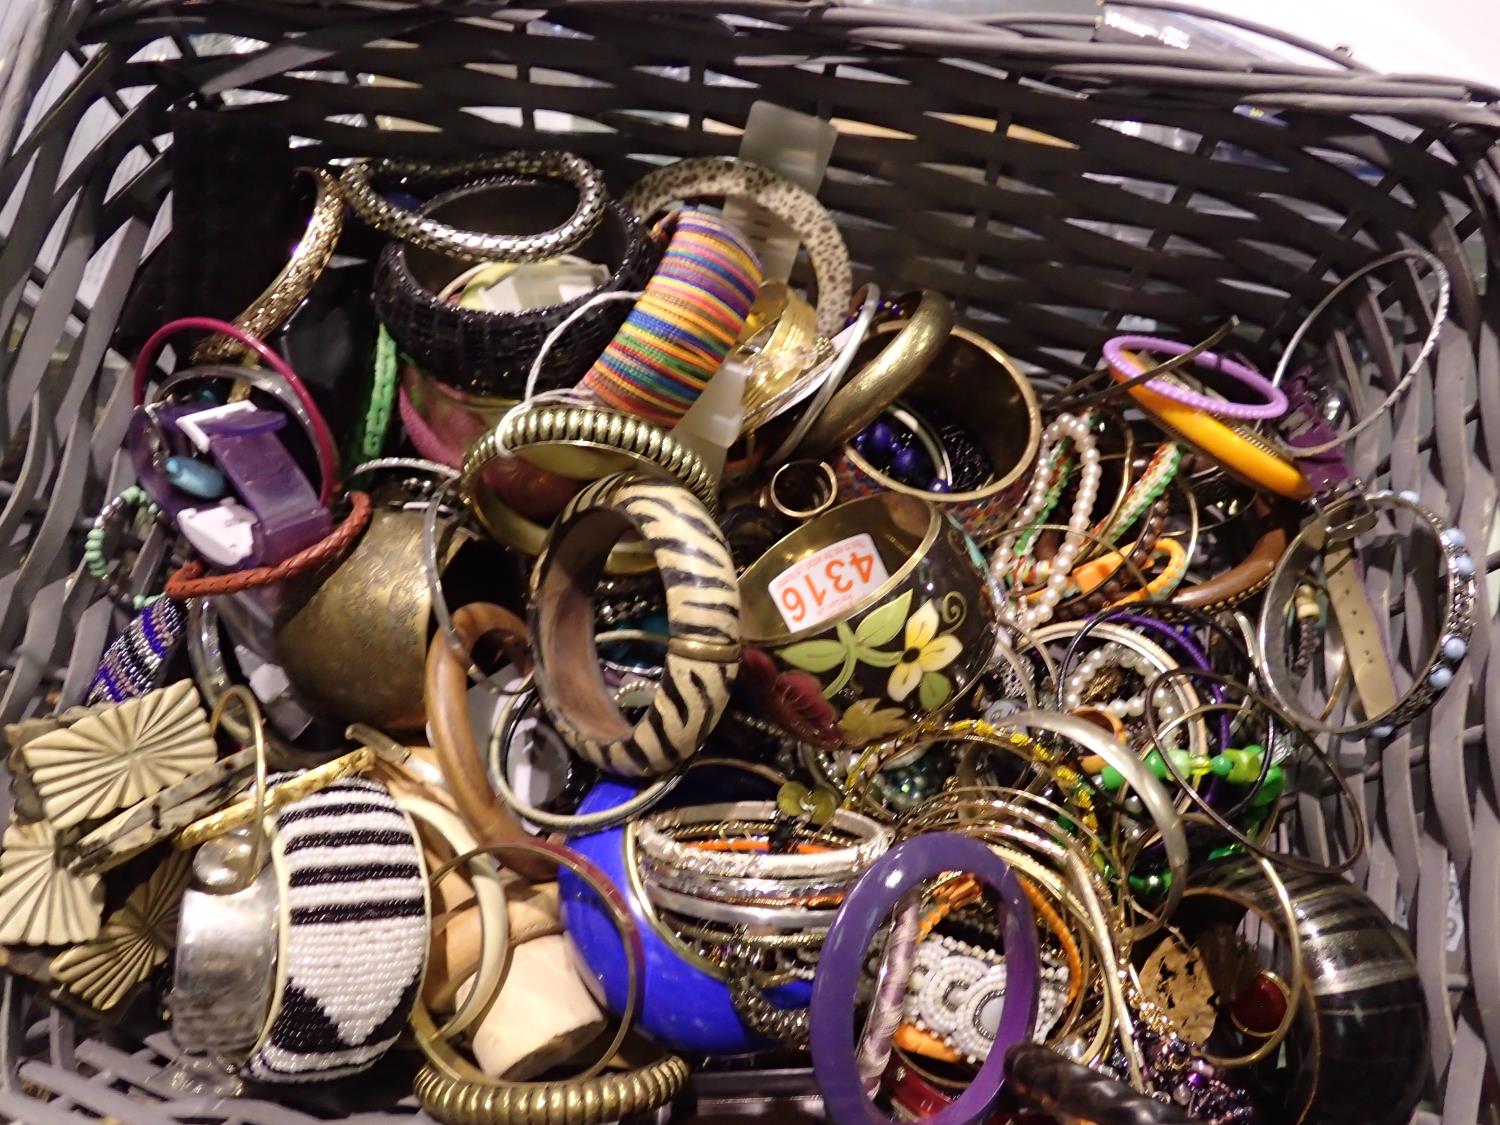 Large quantity of costume jewellery, mainly bangles. P&P Group 2 (£18+VAT for the first lot and £3+